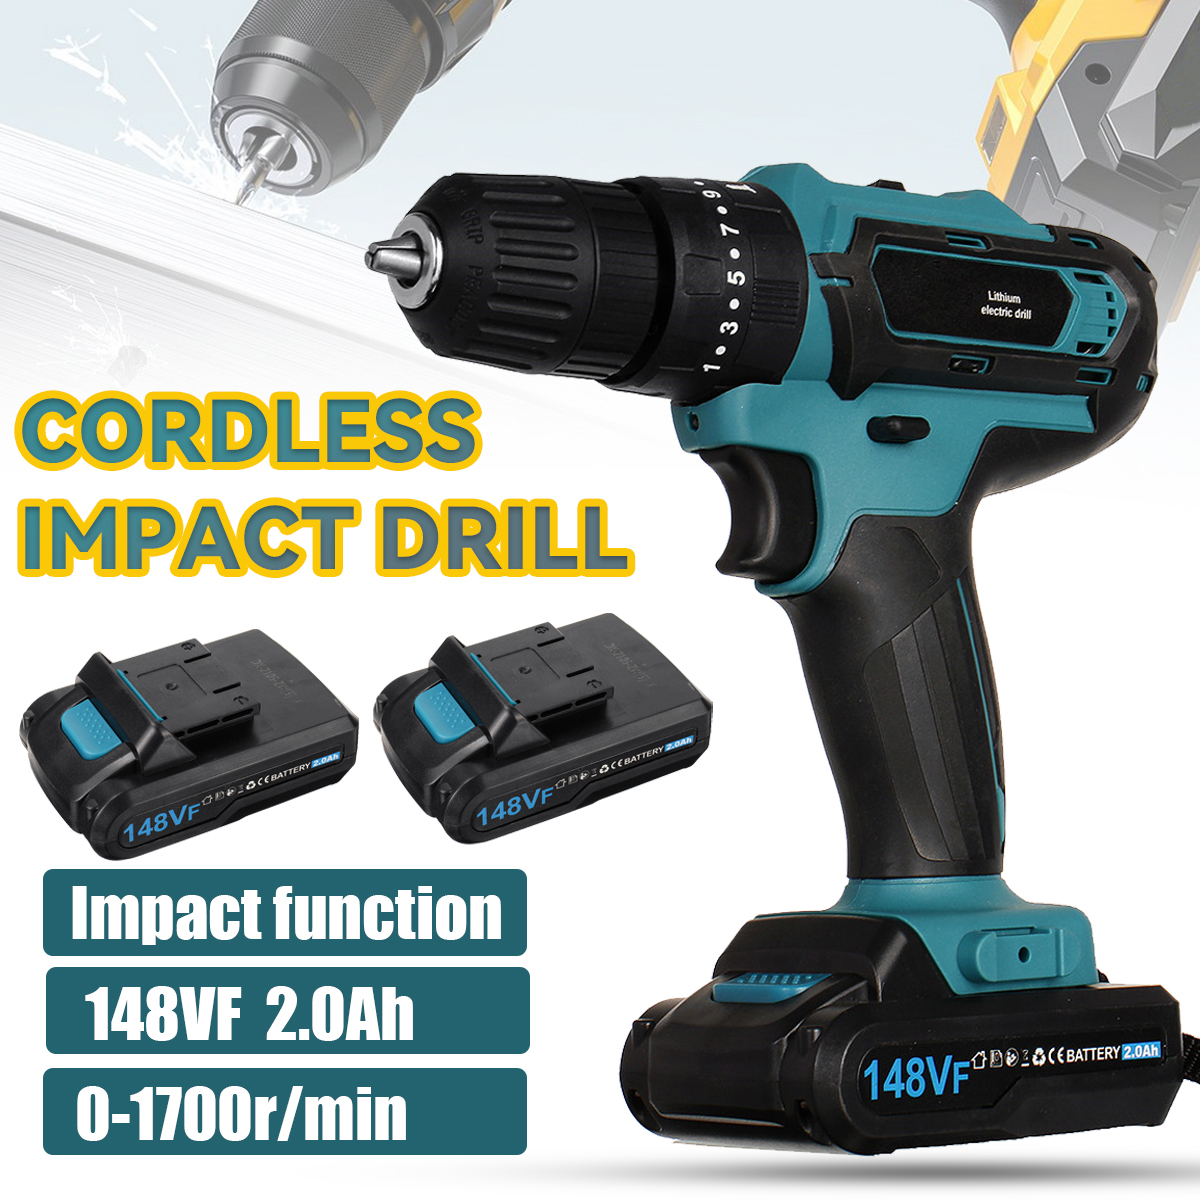 148VF-20Ah-Cordless-Electric-Impact-Drill-Rechargeable-Drill-Screwdriver-W-1-or-2-Li-ion-Battery-1888042-2